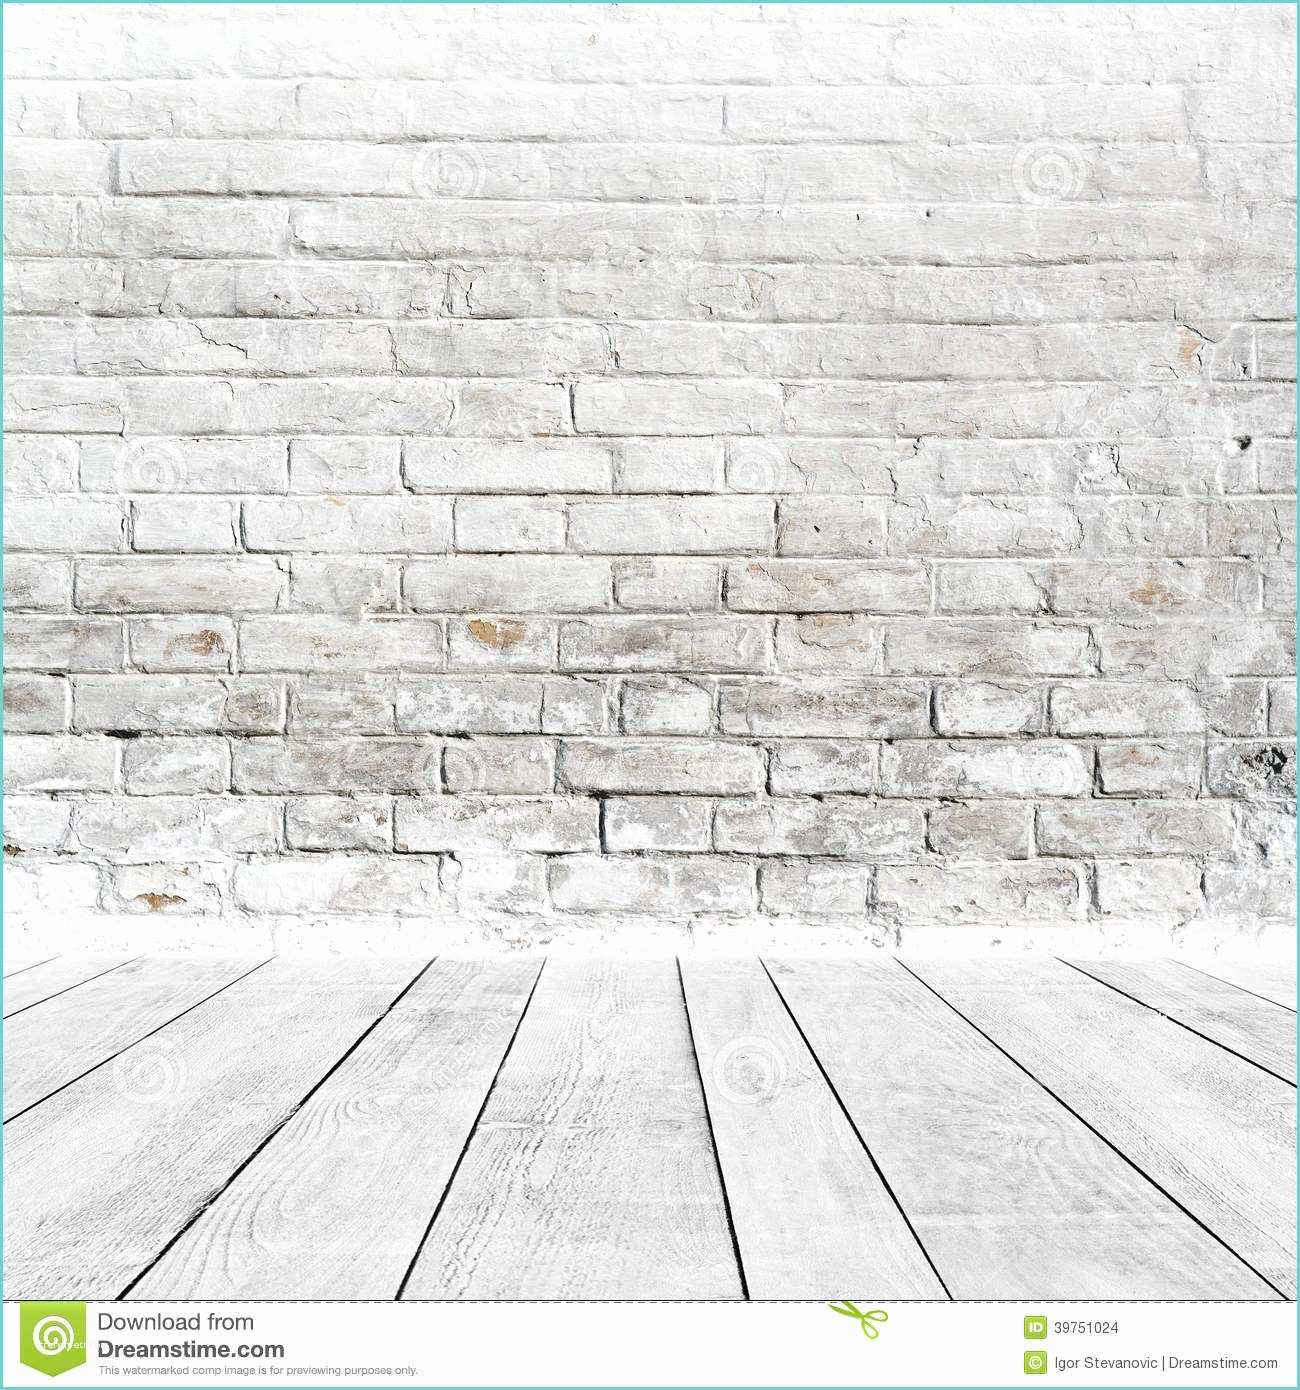 White Brick Wall and Floor Room Interior with White Brick Wall and Wood Floor Stock